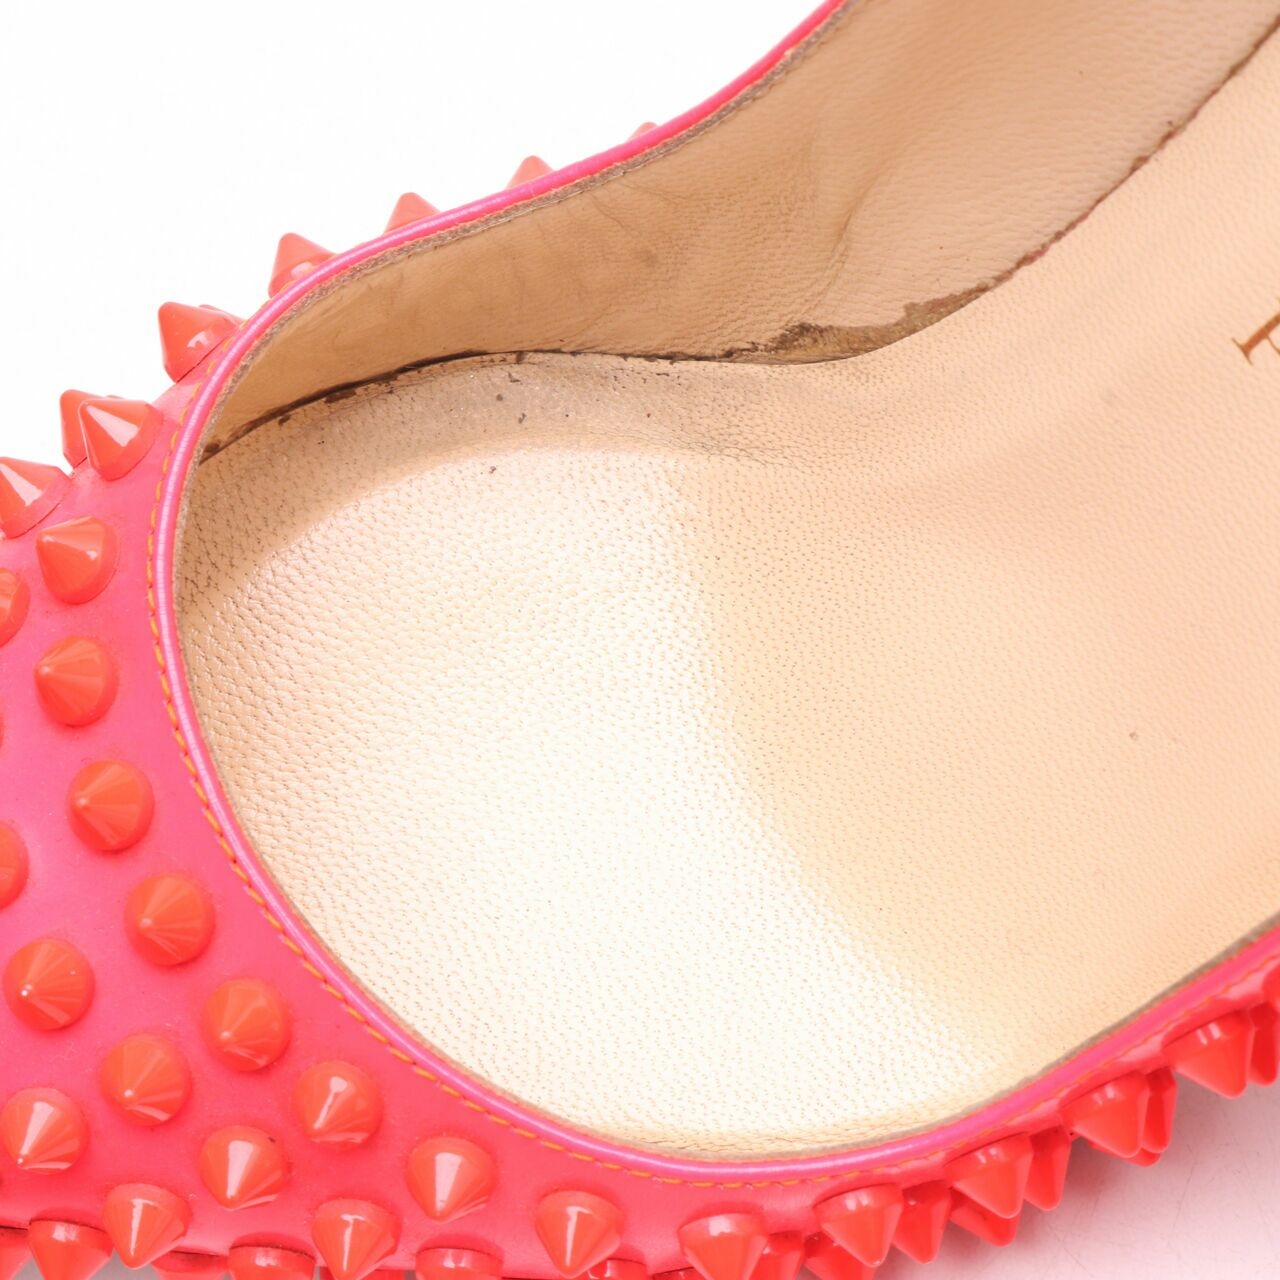 Christian Louboutin Neon Coral Patent Leather Pigalle Spikes Pump Heels